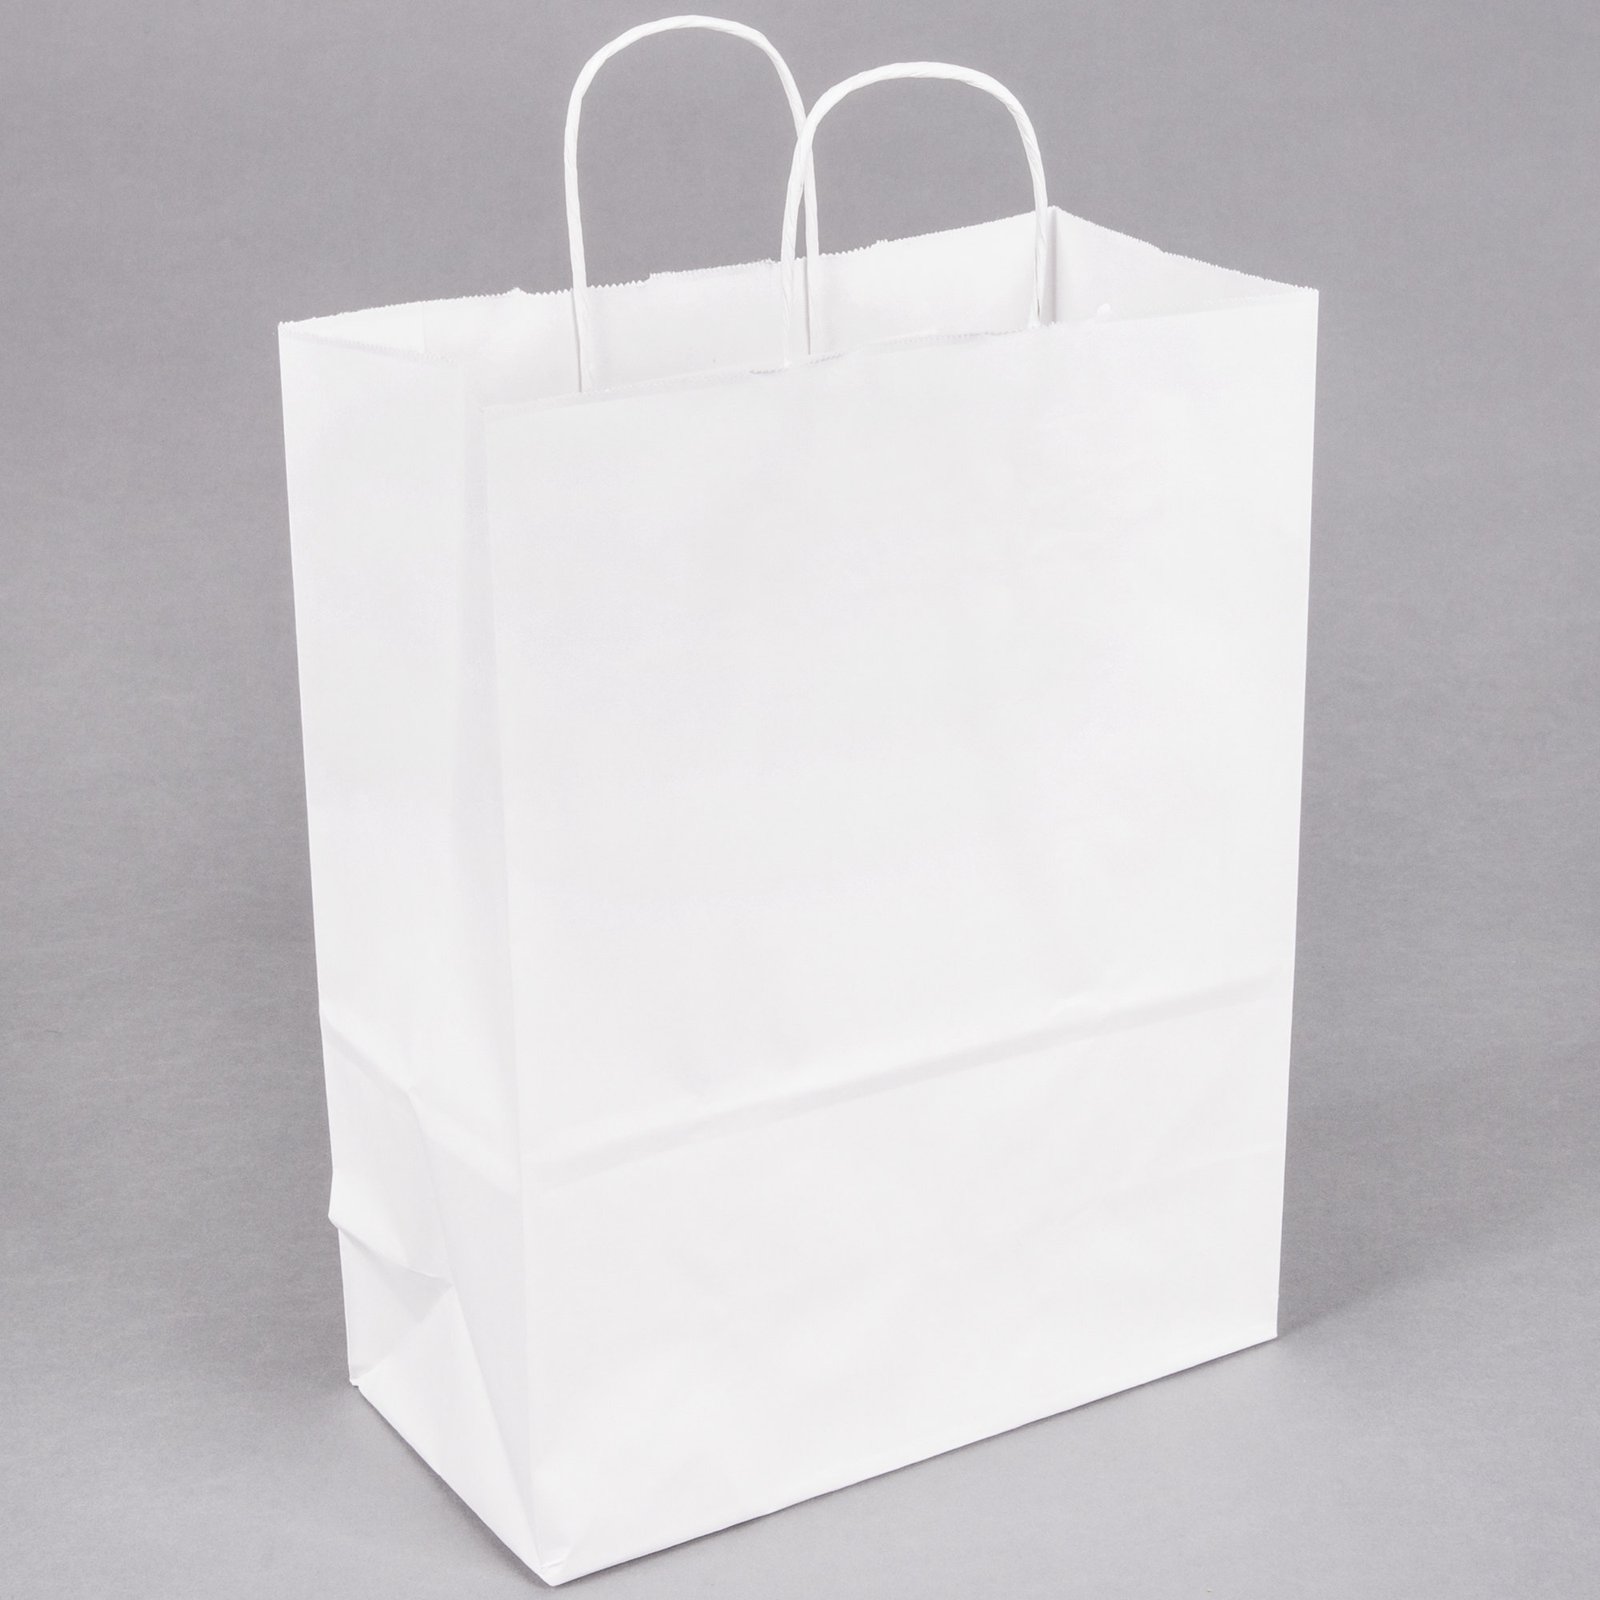 Plastic D Cut Retail Carry Bags & Shopping Bags Summary